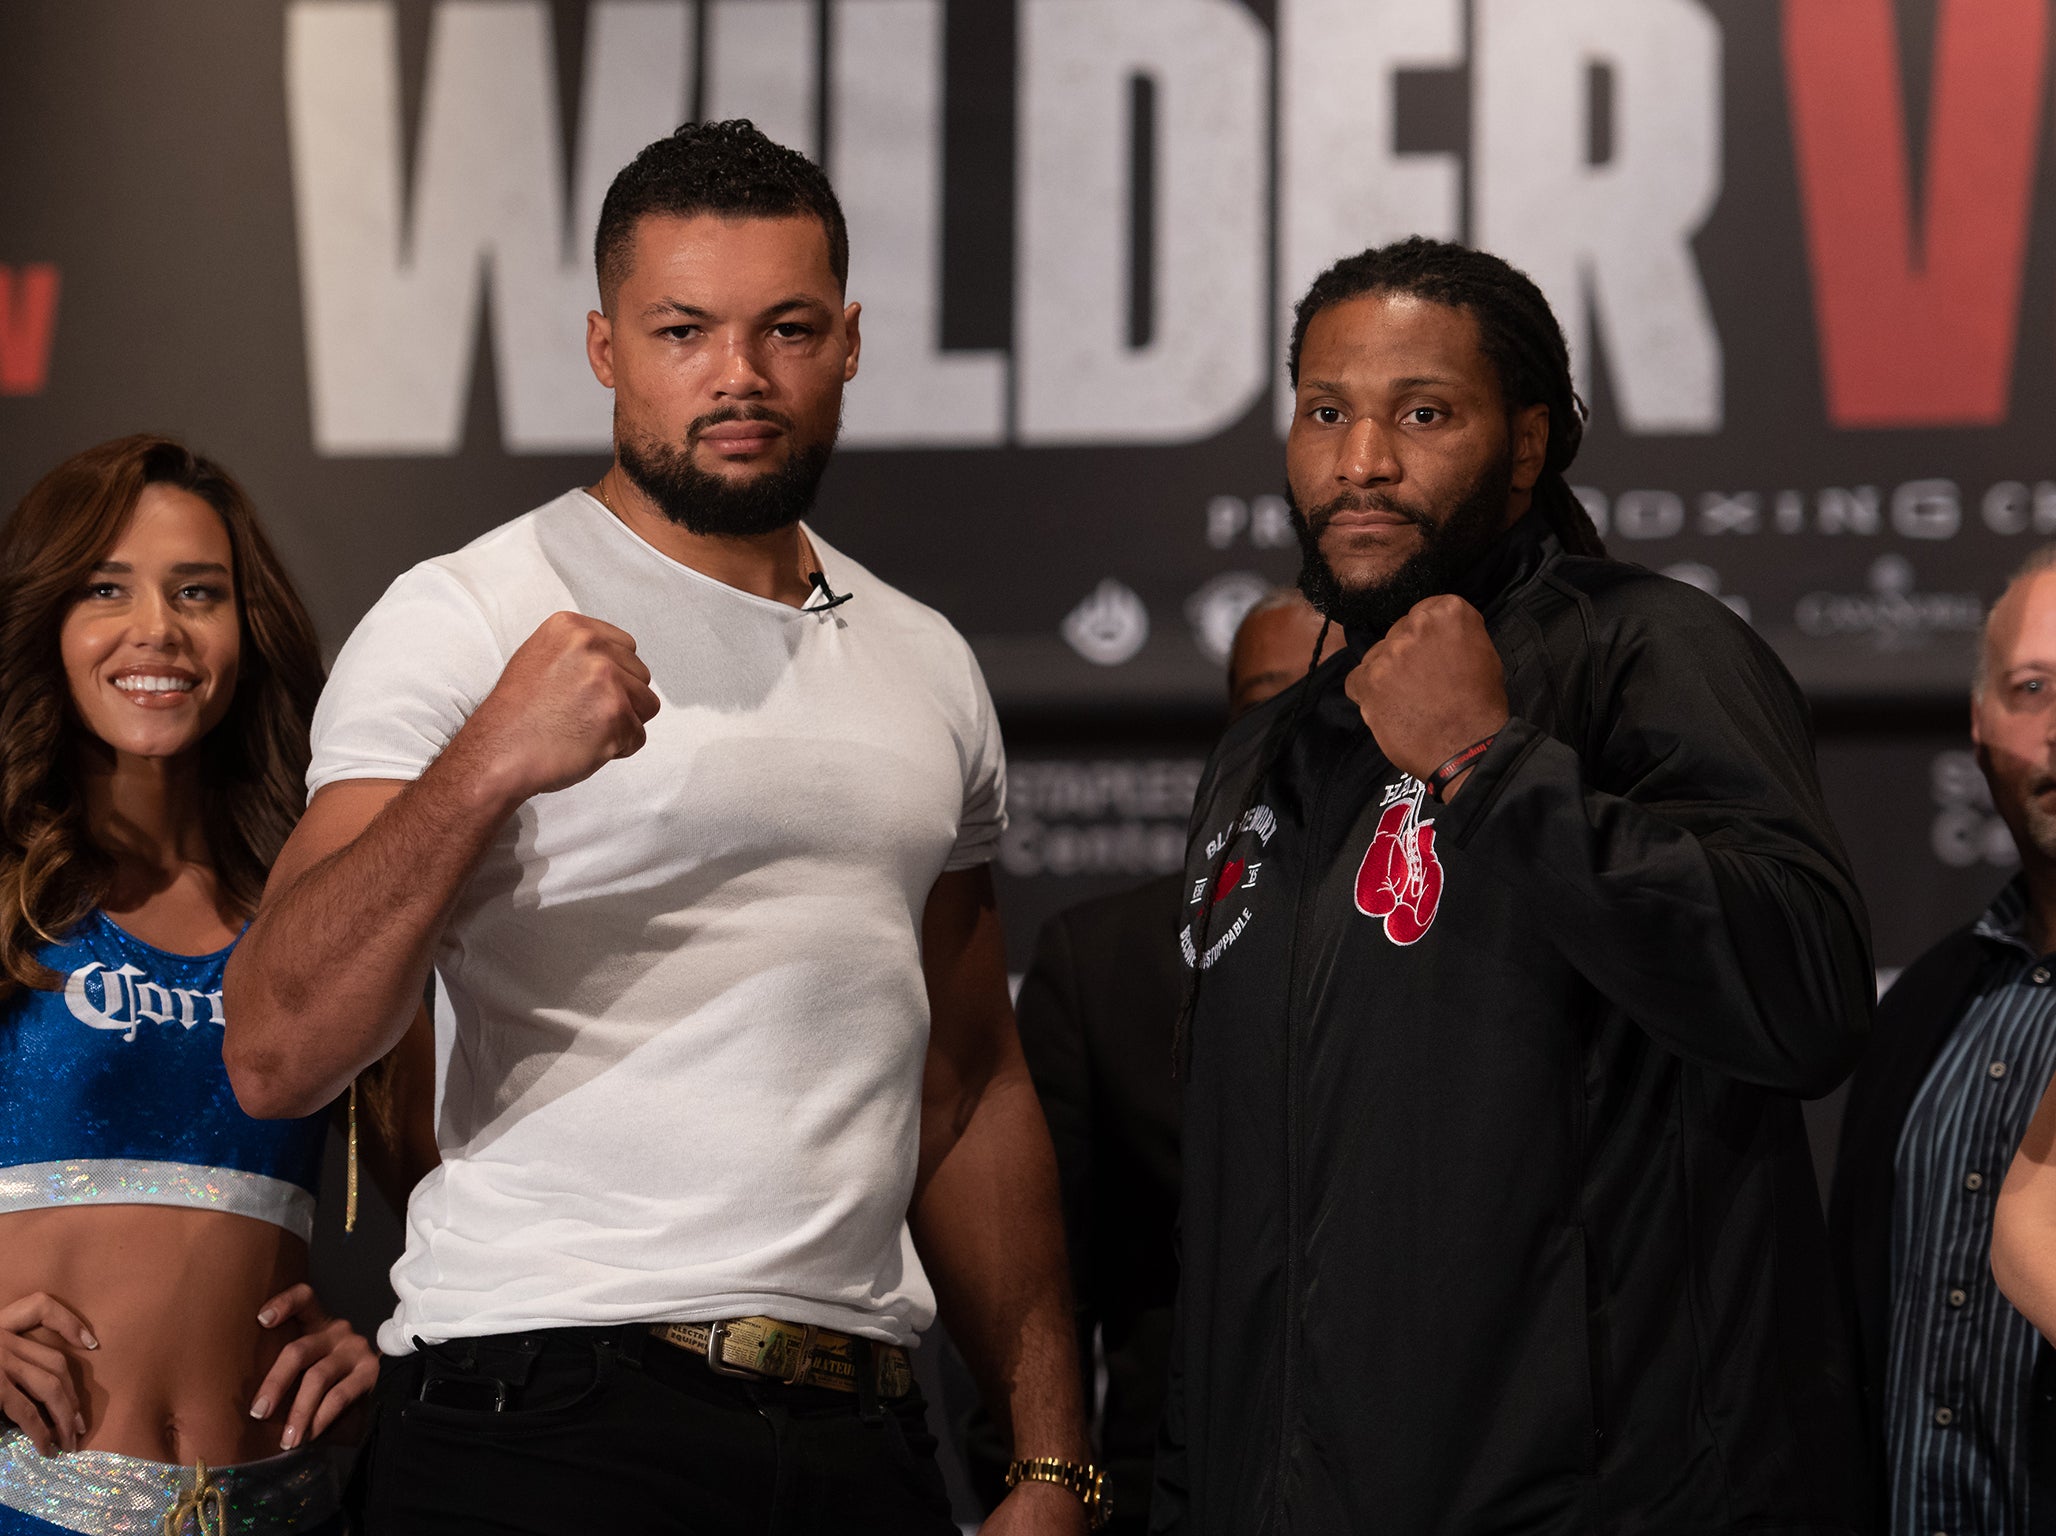 Joe Joyce fights in the States once again